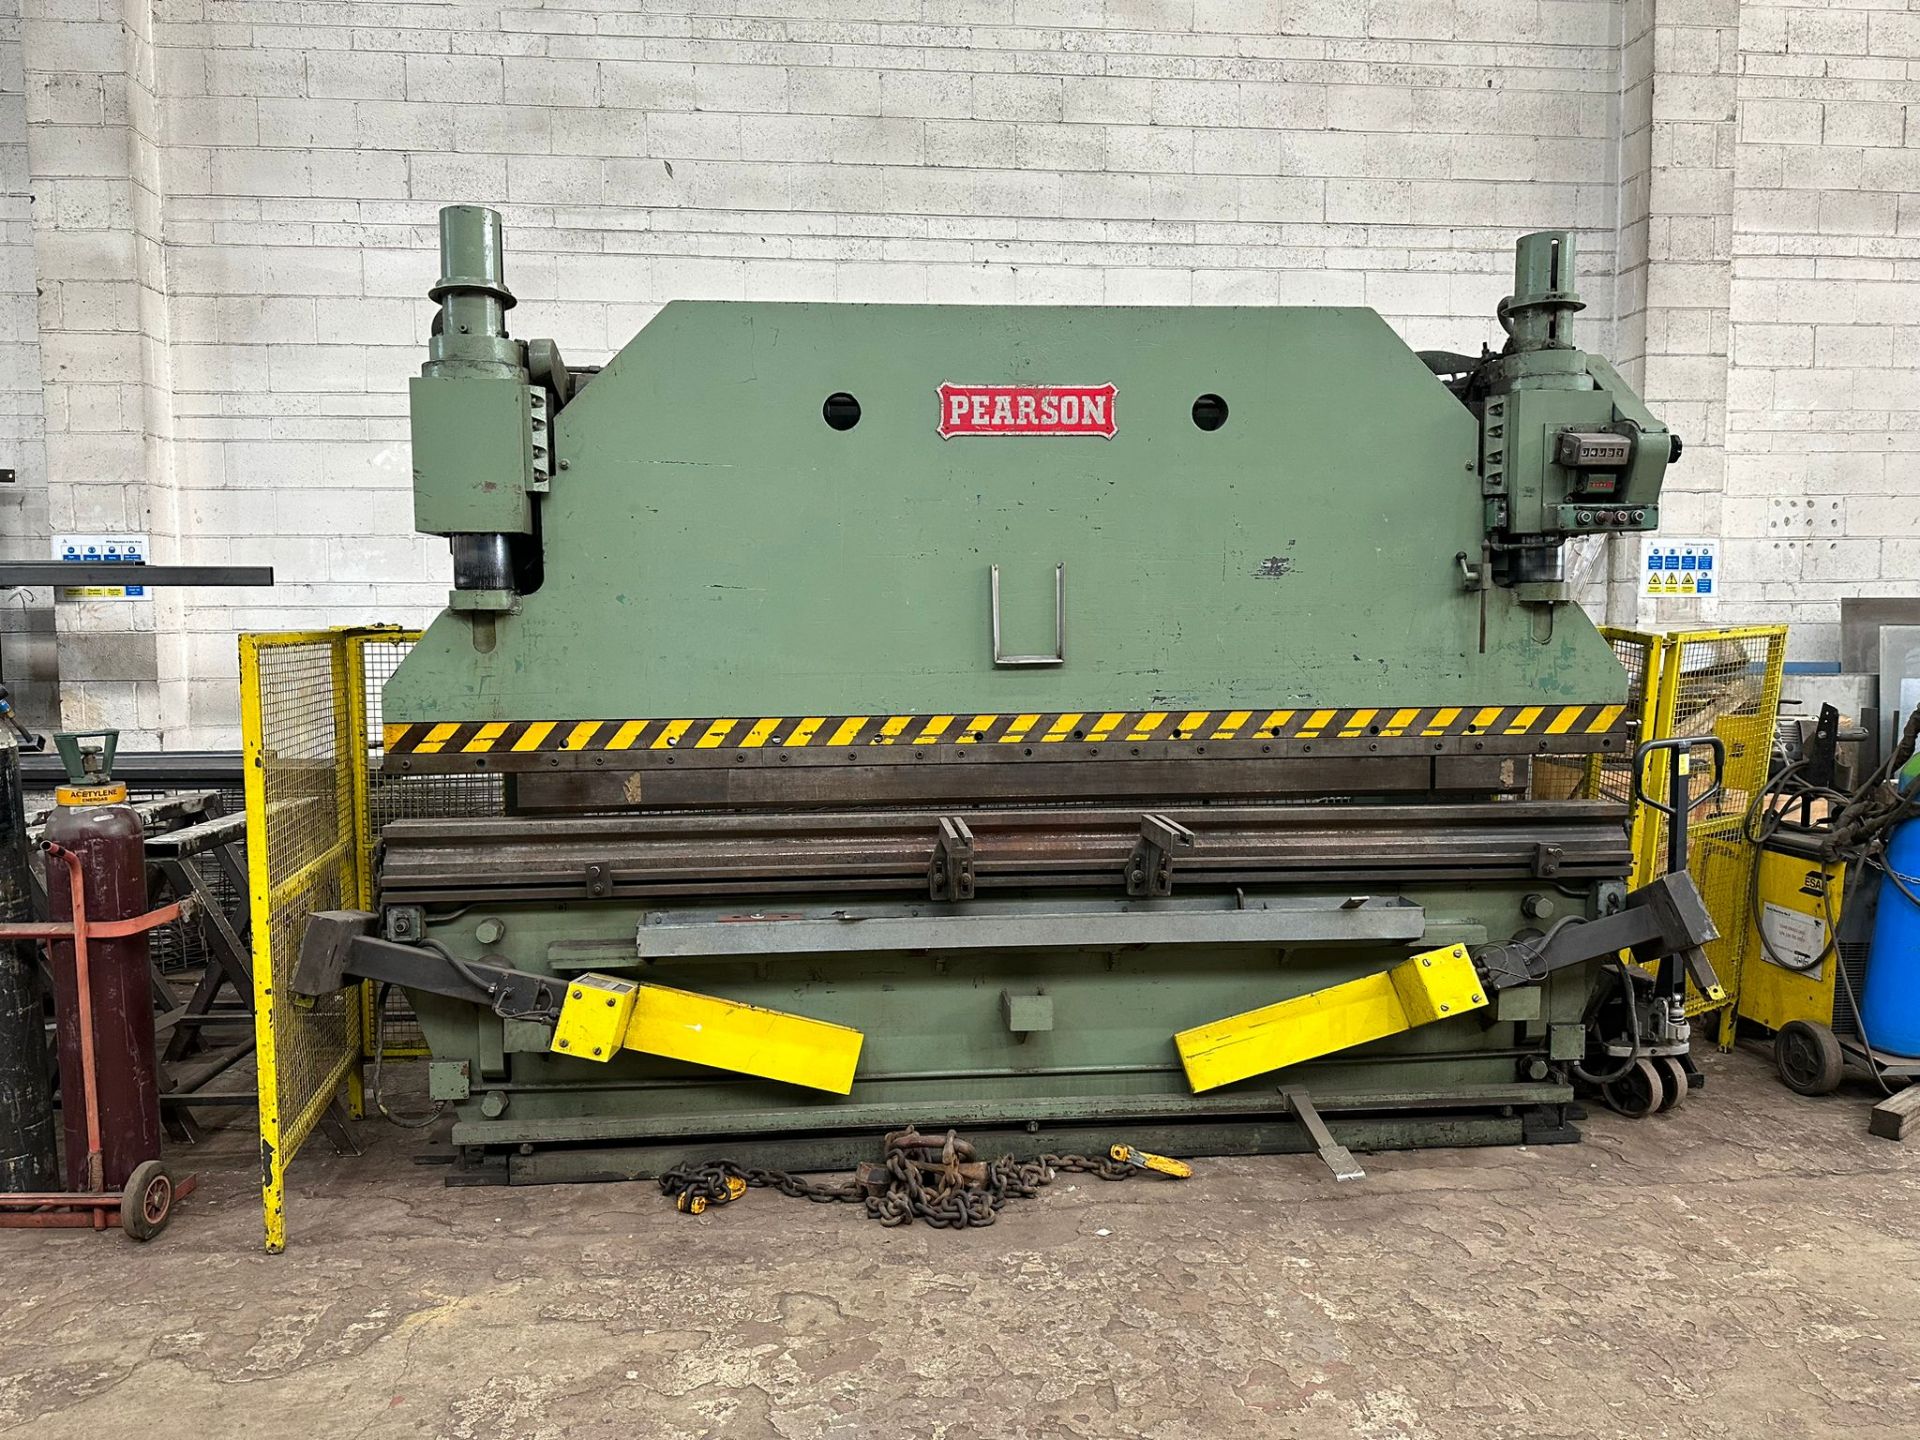 Pearson Hydraulic Press Brake- 155 Ton Capacity with Light Guards- 3700mm Bed - Image 4 of 5